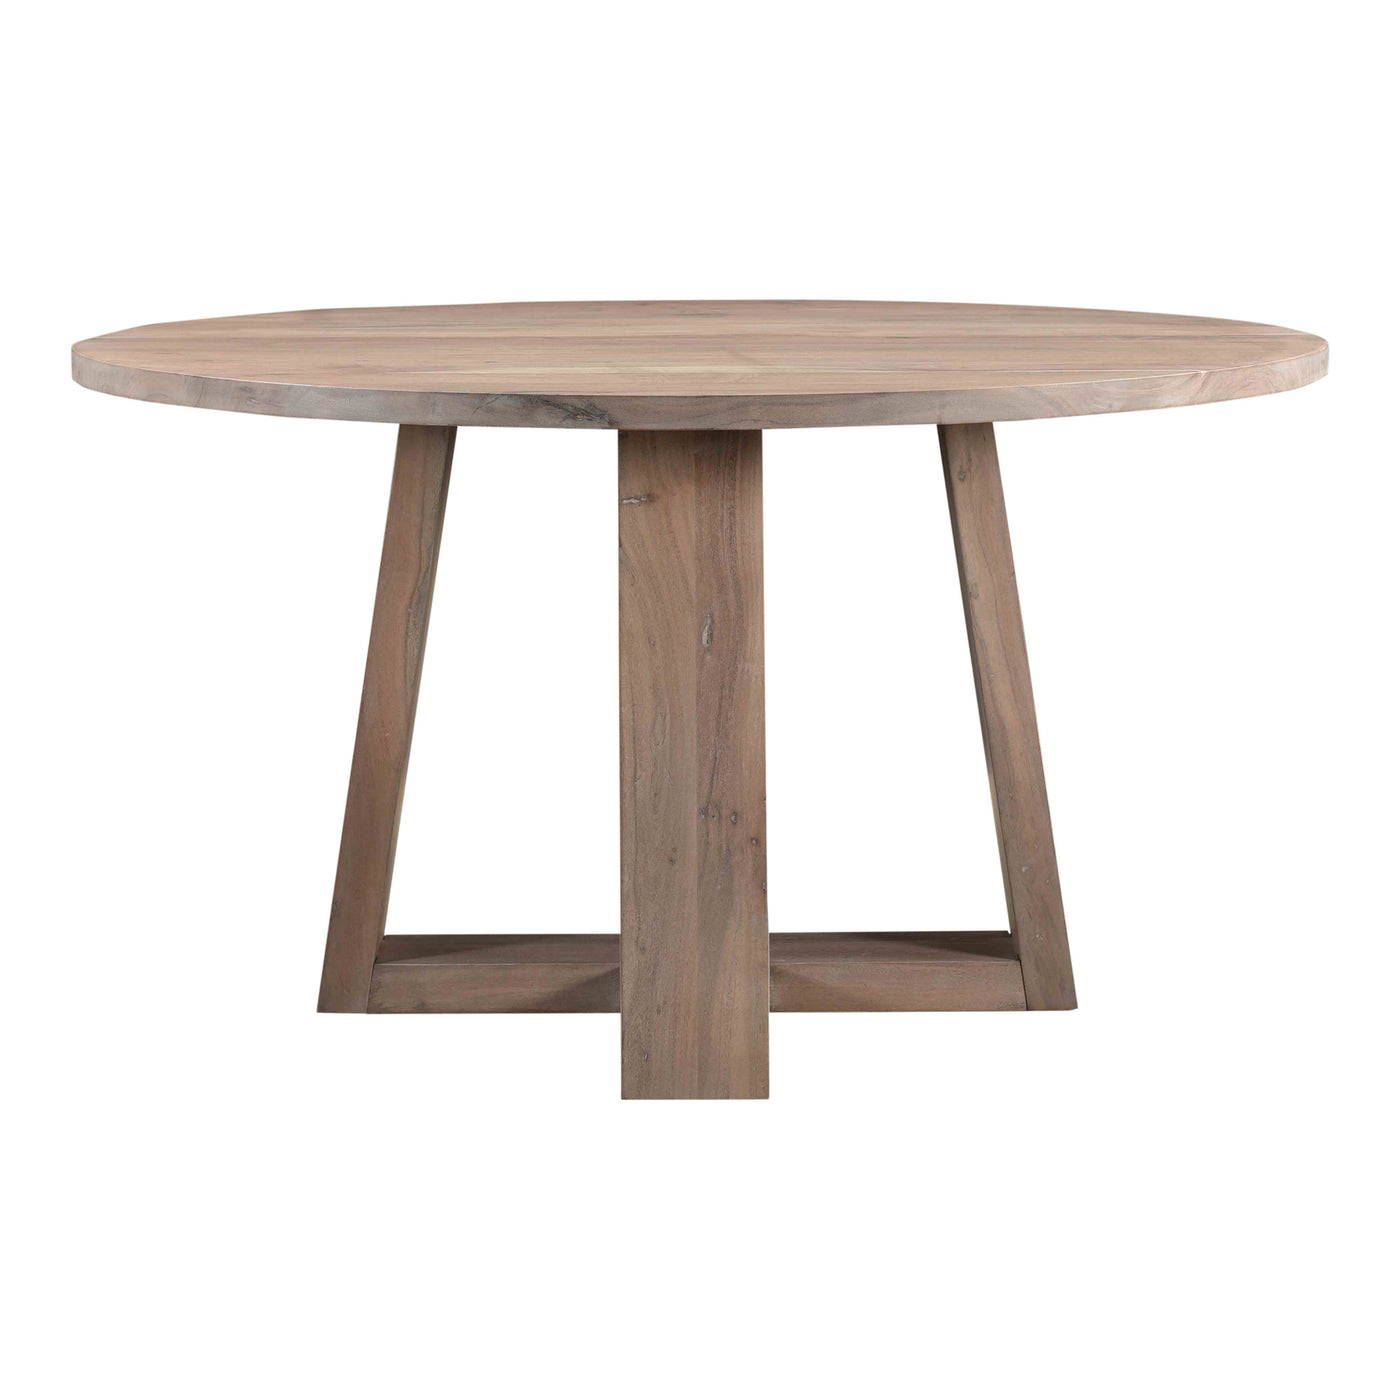 Sweetly bright in a Scandinavian whitewashed finish, the Tanya round dining table is made of solid acacia wood with an org...